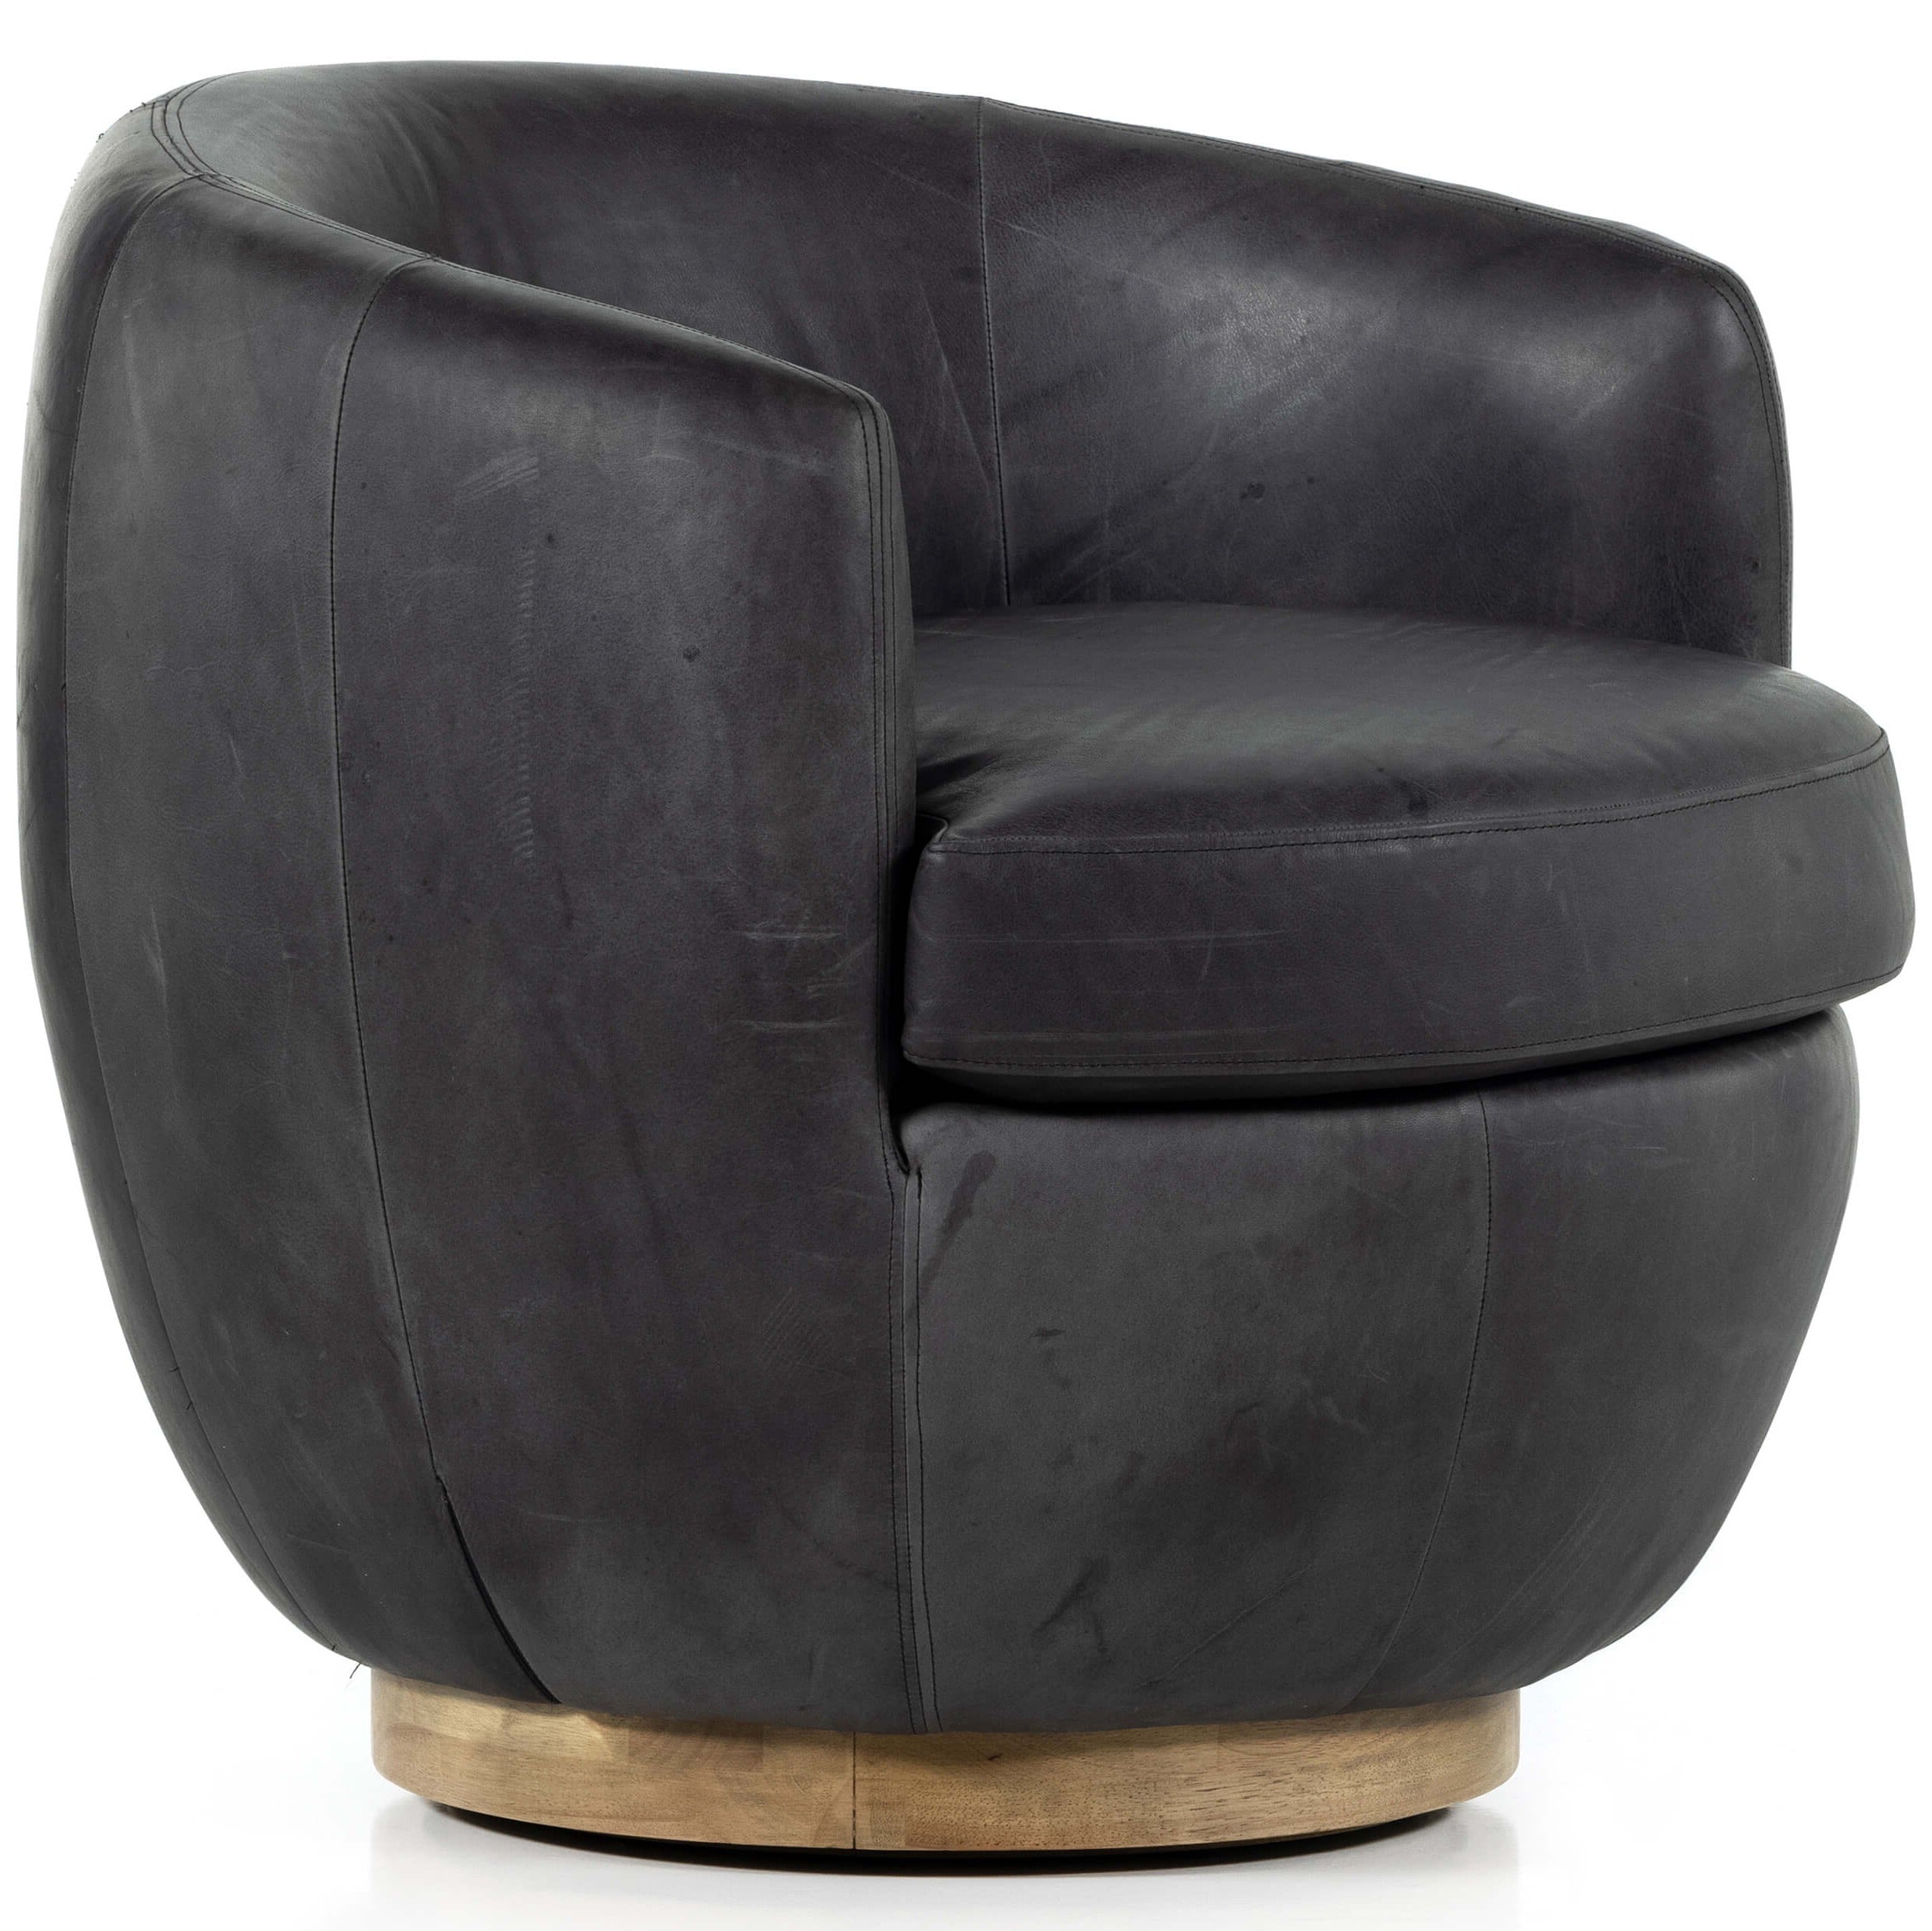 Image of Rhiannon Leather Swivel Chair, Heirloom Charcoal